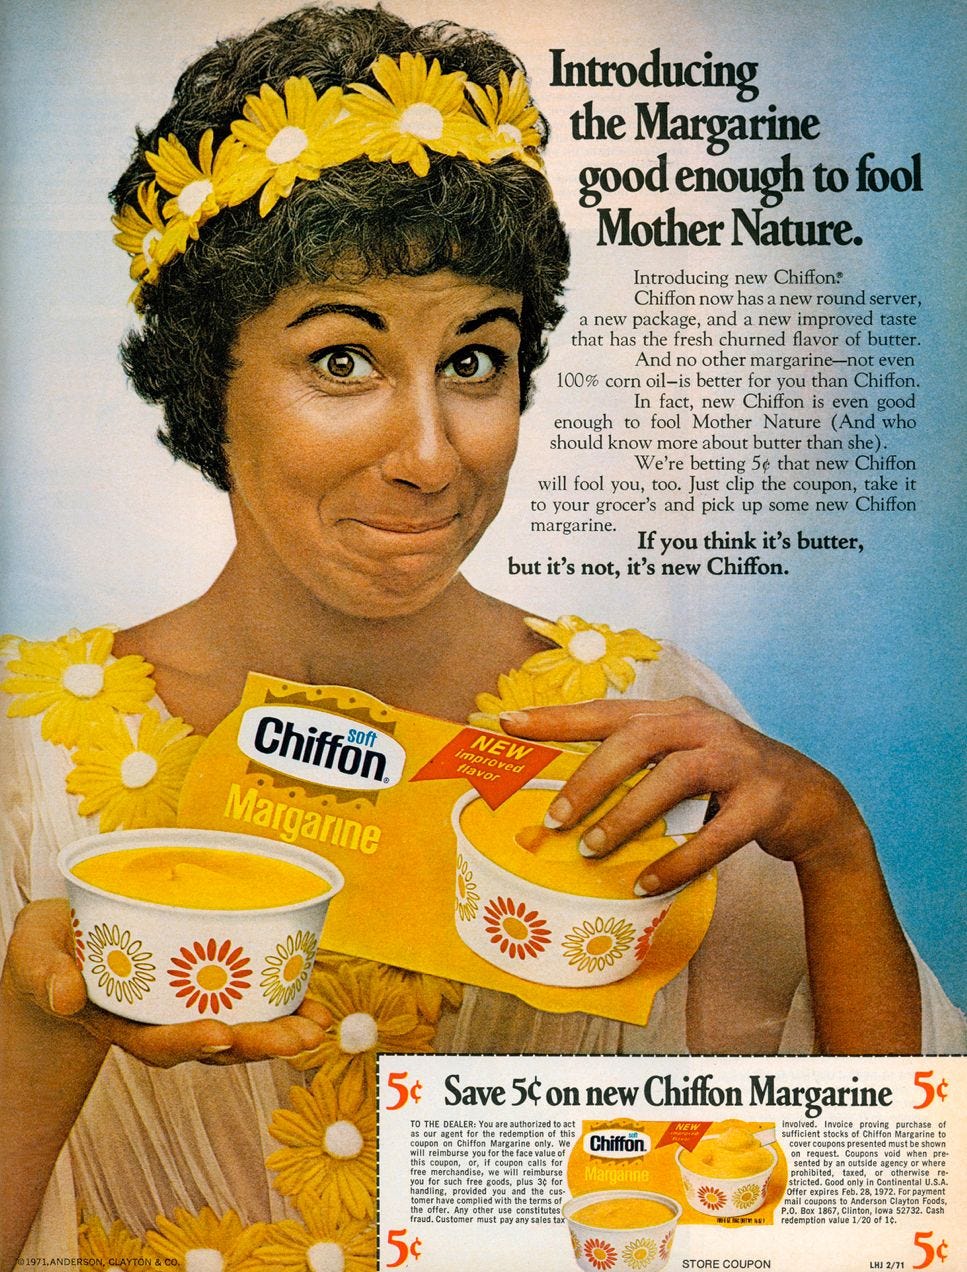 When we say Mother Nature, we don’t mean the margarine lady in these ads.